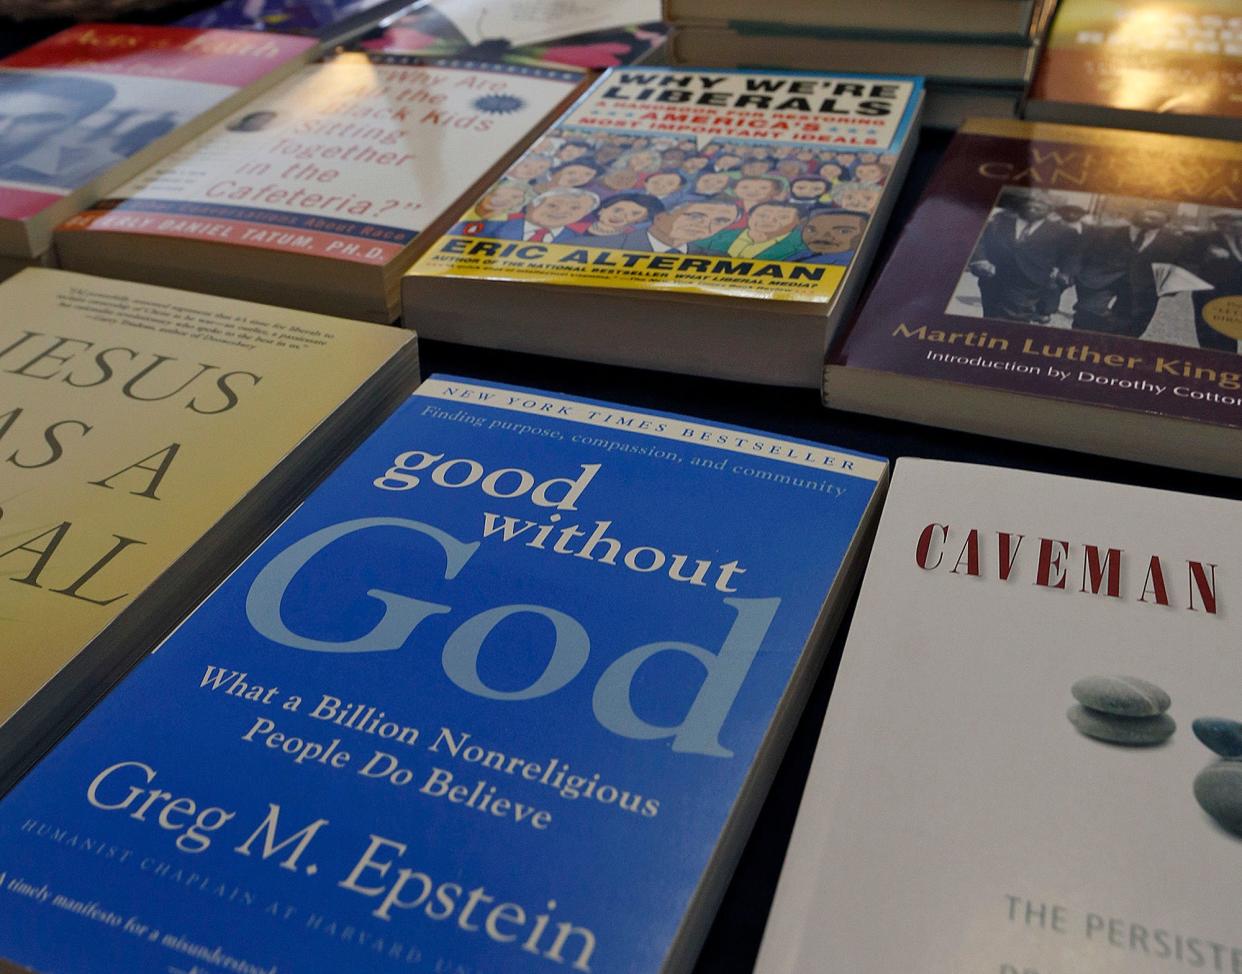 The First Unitarian Universalist Church of Columbus book store offers a wide range of religious and spiritual books for believers and non-believers.